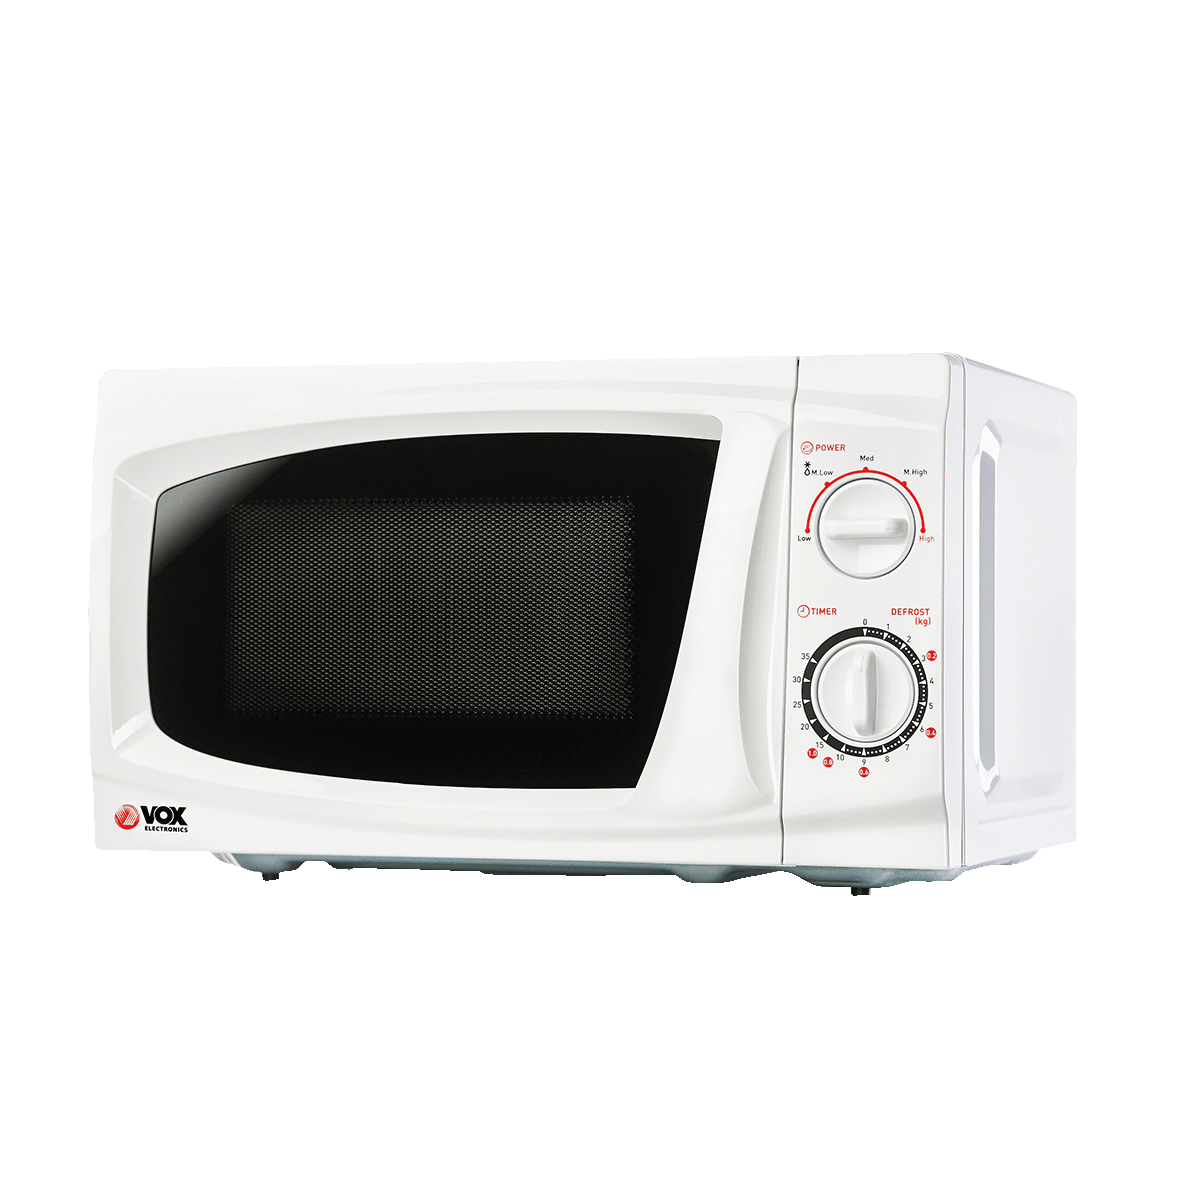 Microwave oven MWH-M20 